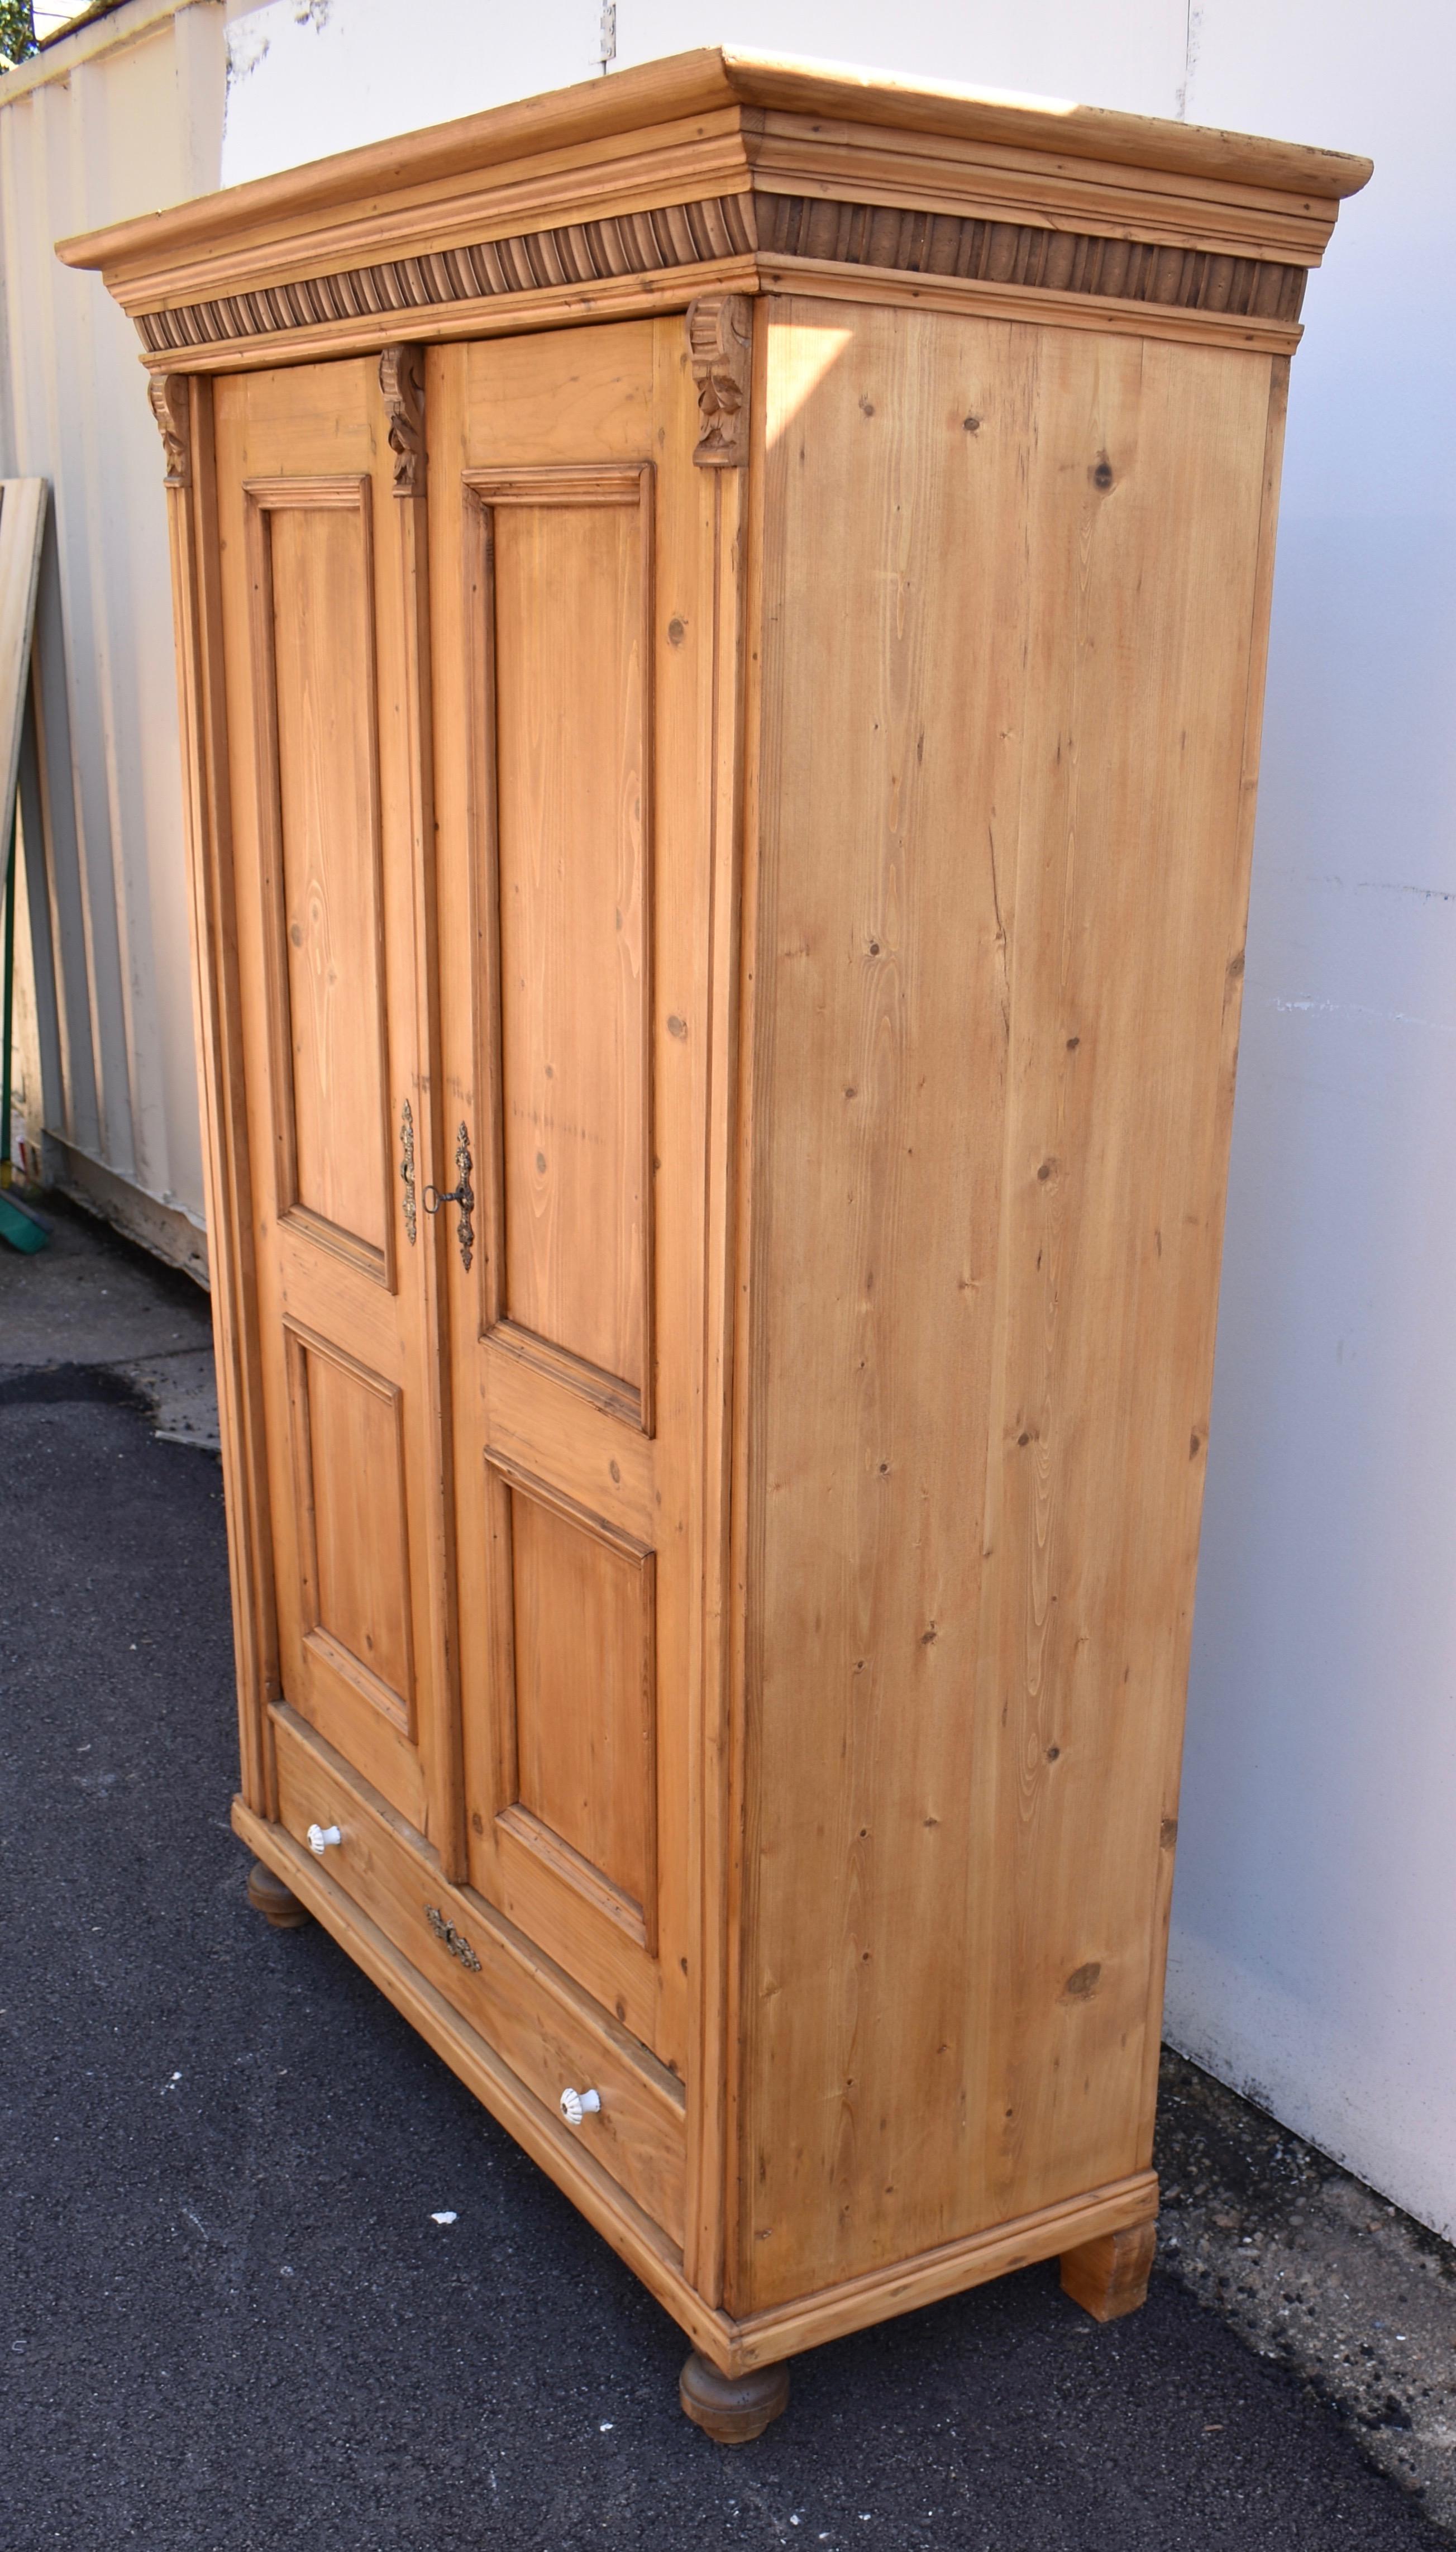 Polished Pine Two Door Armoire with Interior